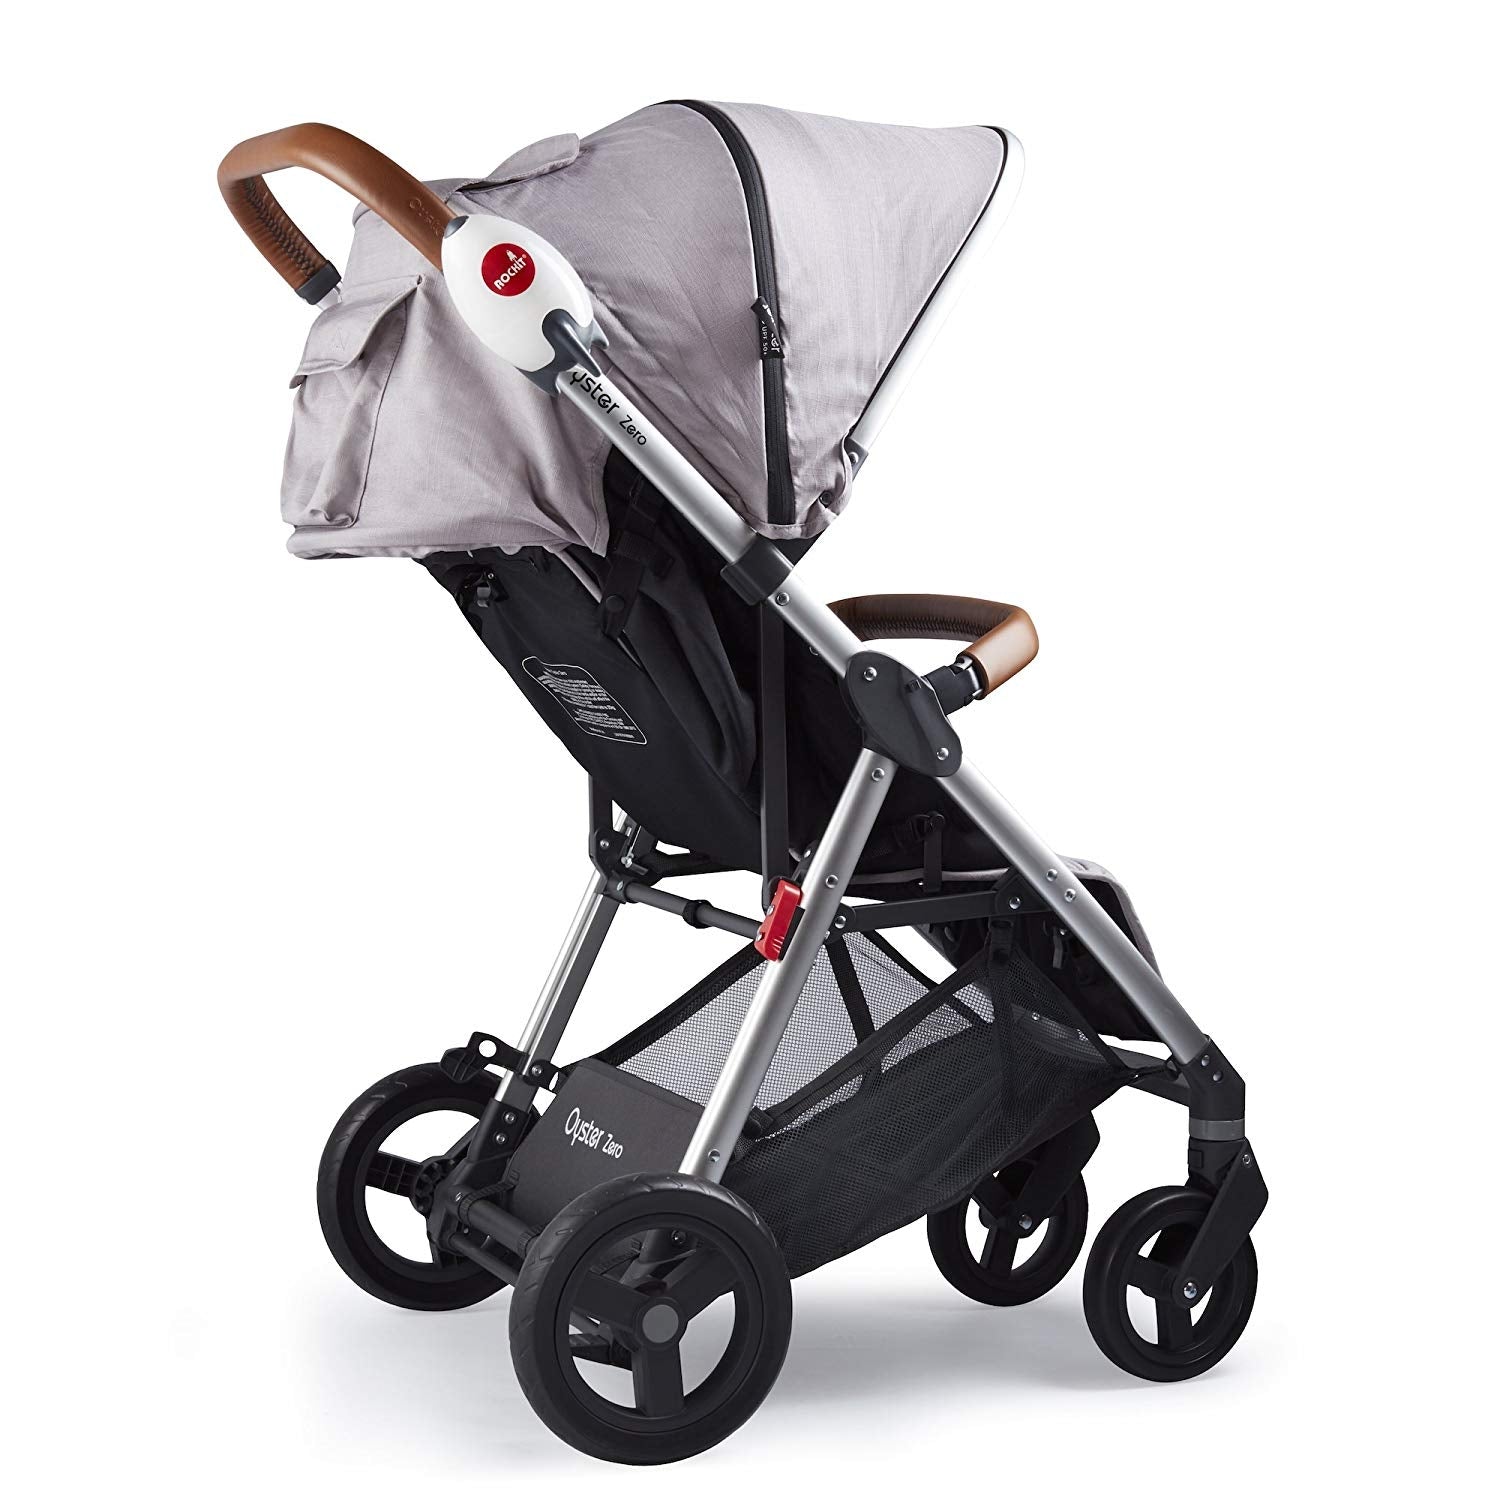 Rockit portable stroller rocker review - An easy way to soothe a